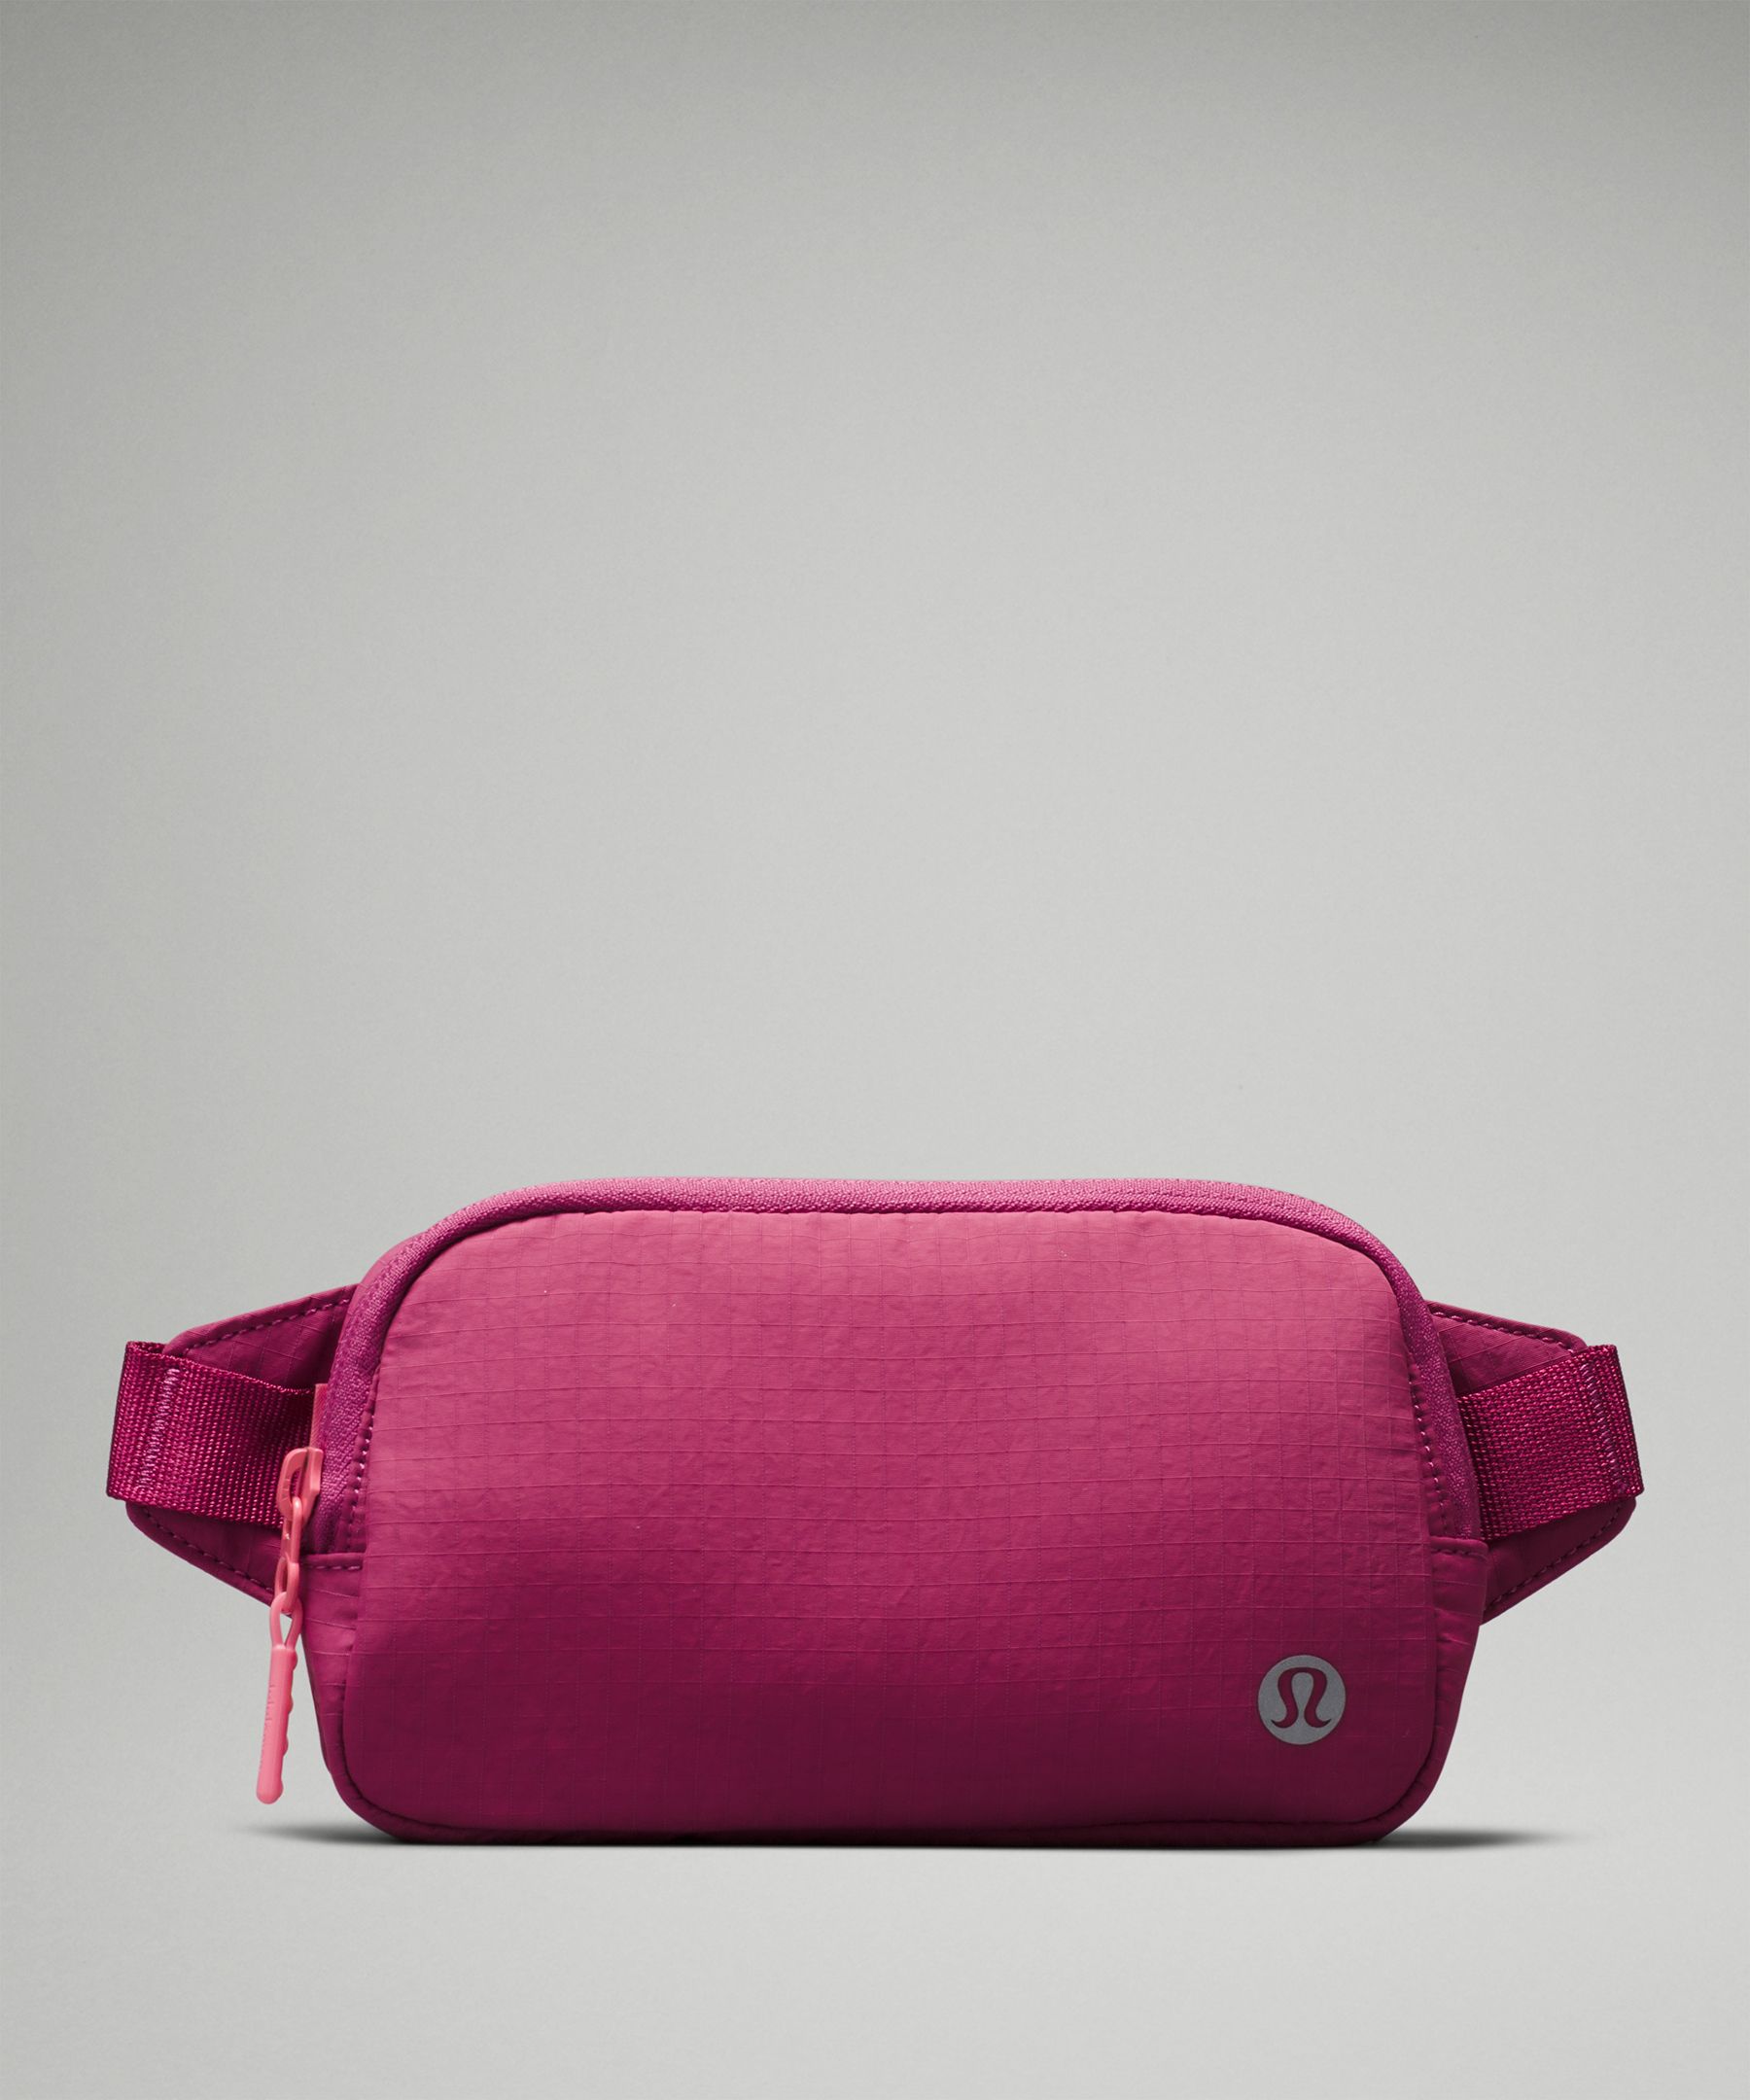 LULULEMON Everywhere Belt Bag SONIC PINK/WHITE - 1 Lt - AUTHENTIC NEW WITH  TAGS